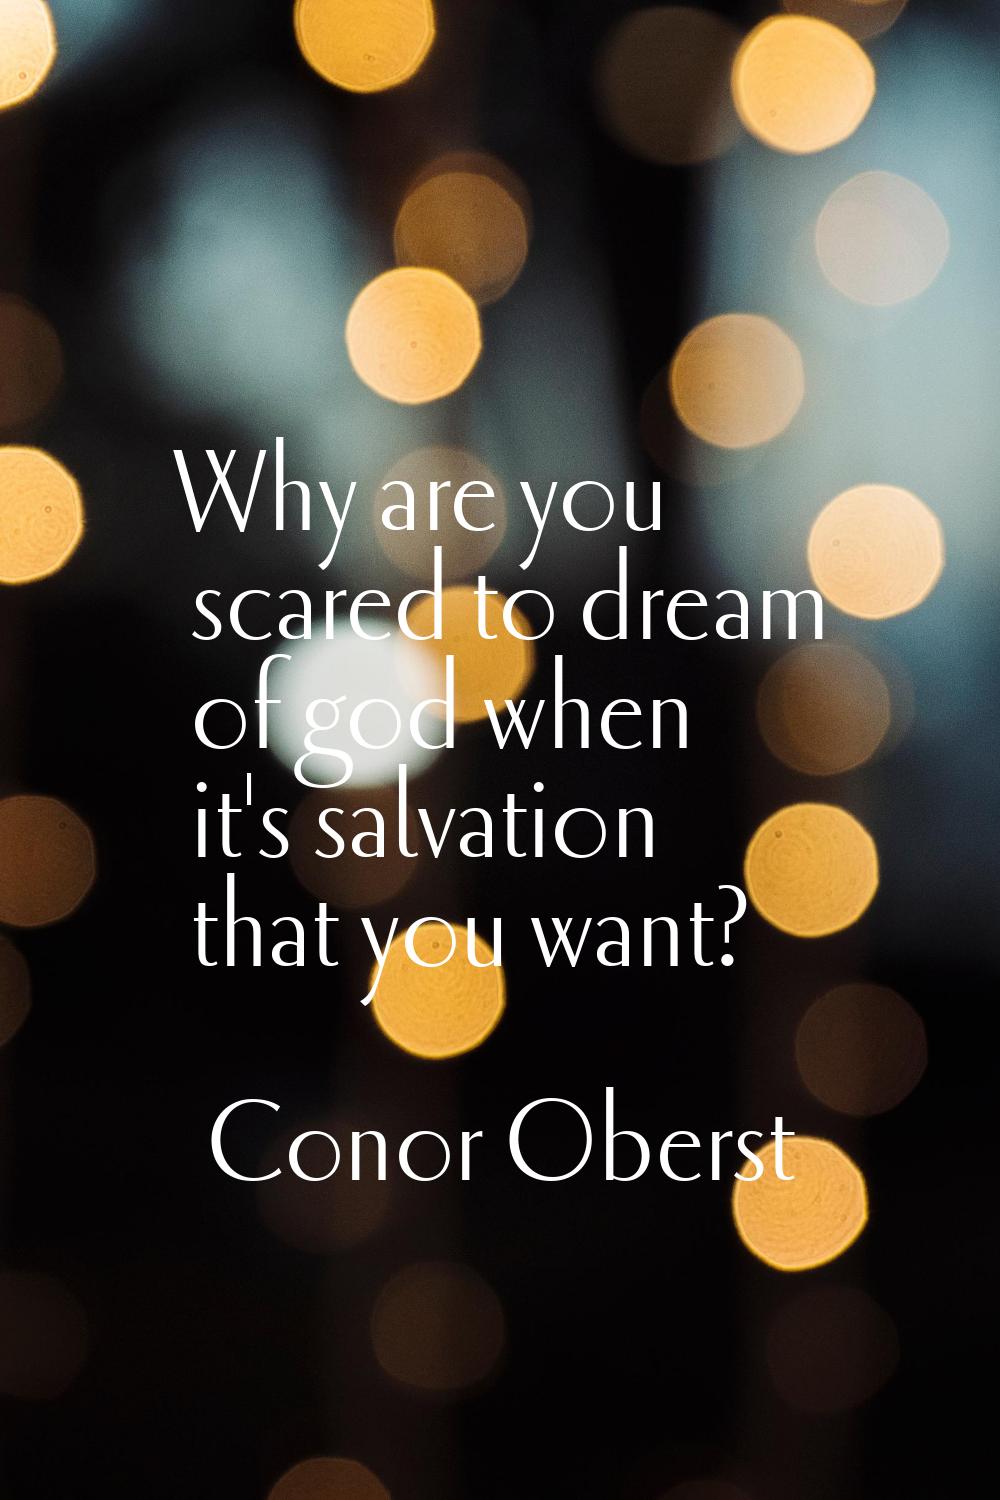 Why are you scared to dream of god when it's salvation that you want?